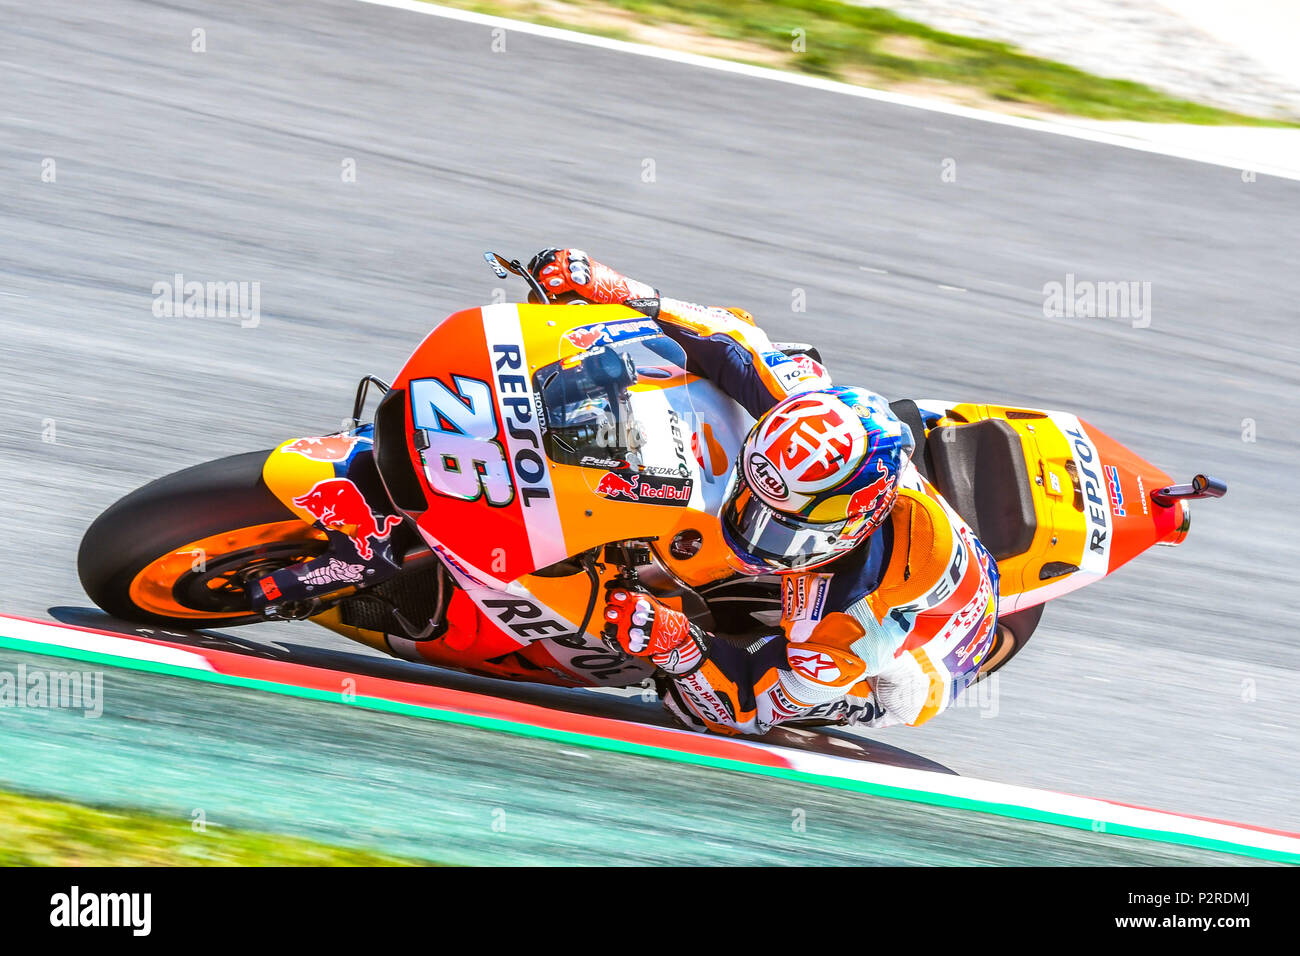 Montmelo, Spain. 16th Jun, 2018. DANI PEDROSA (26) of Spain during the MotoGP  qualifying session of the race of the Catalunya Grand Prix at Circuit de  Barcelona racetrack in Montmelo, near Barcelona